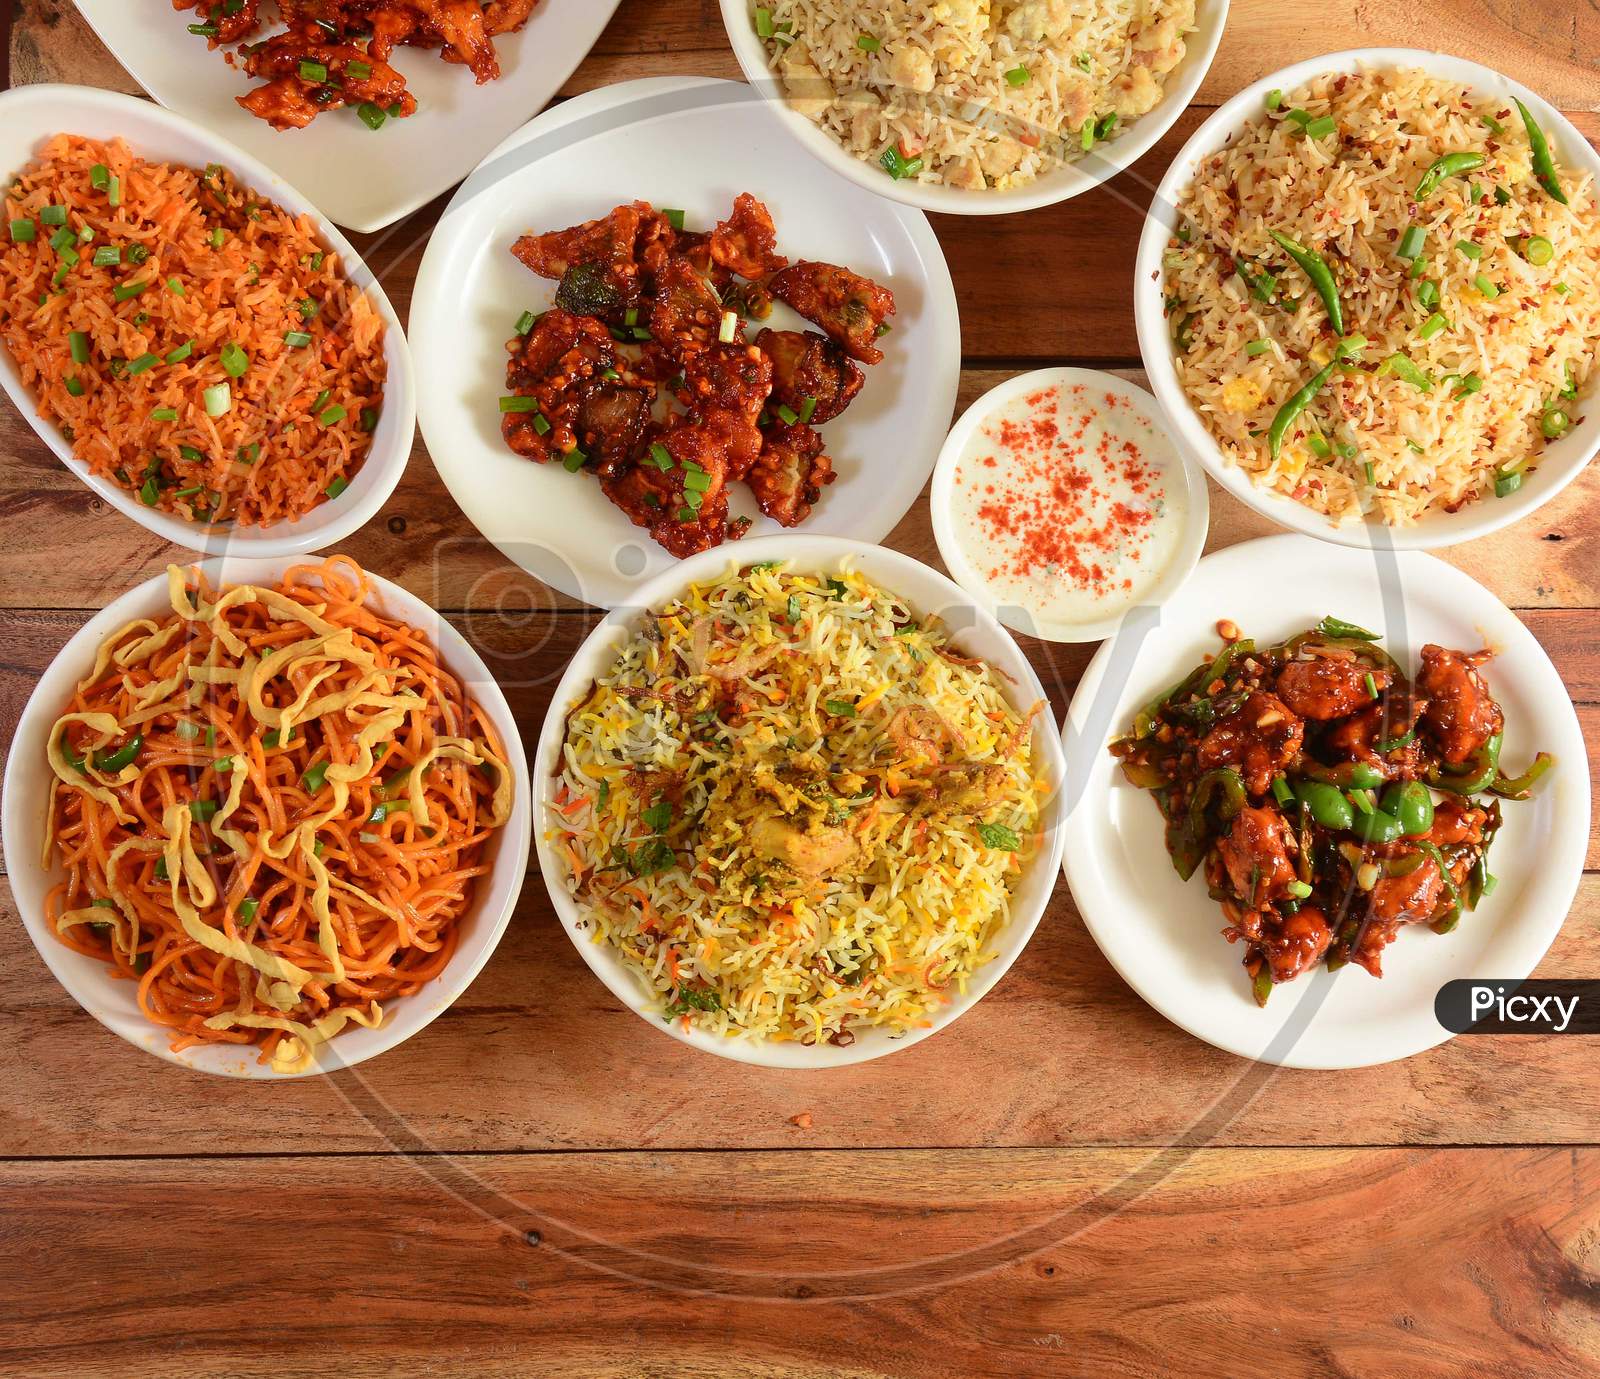 Assorted Indian Foods Dragon Chicken,Chicken Biryani,Chicken Fried Rice,Veg Noodles And Garlic Chicken On Wooden Background. Dishes And Appetizers Of Indian Cuisine